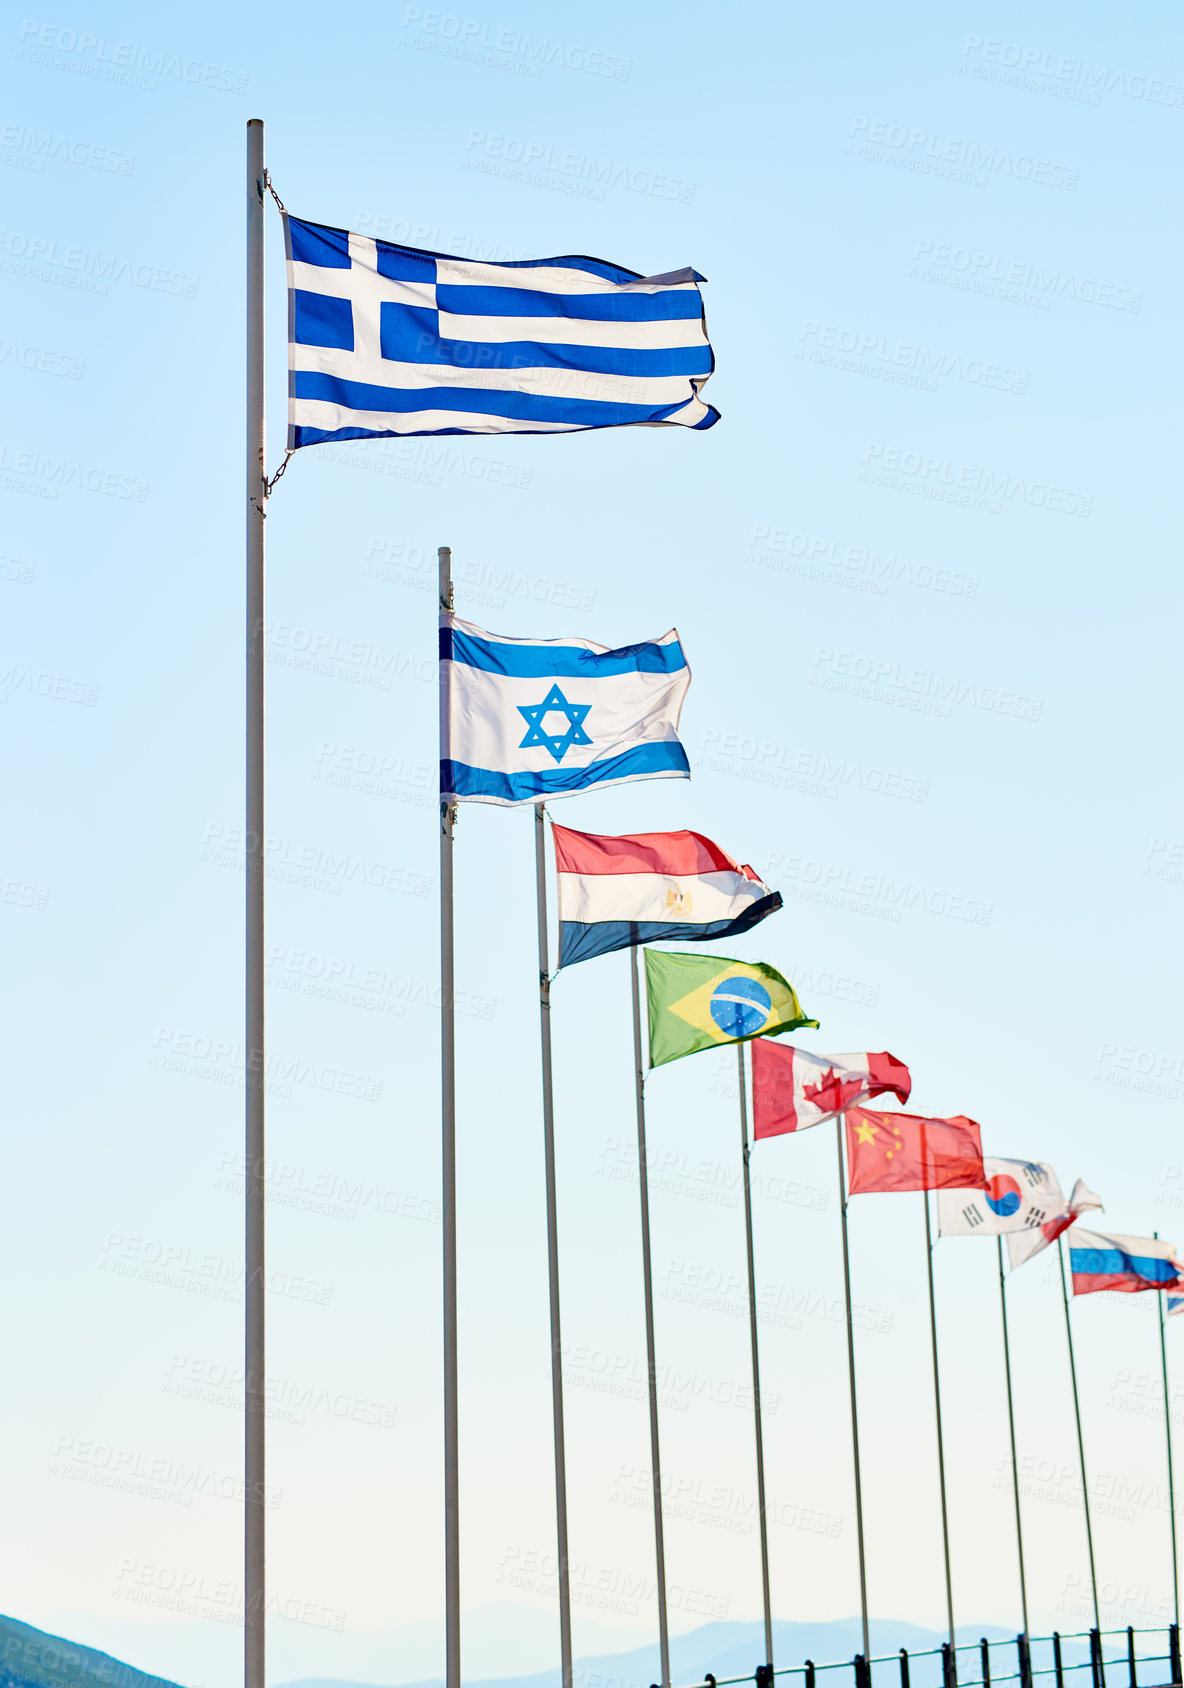 Buy stock photo Shot of a variety of different kinds of country's flags standing next to each other outside during the day